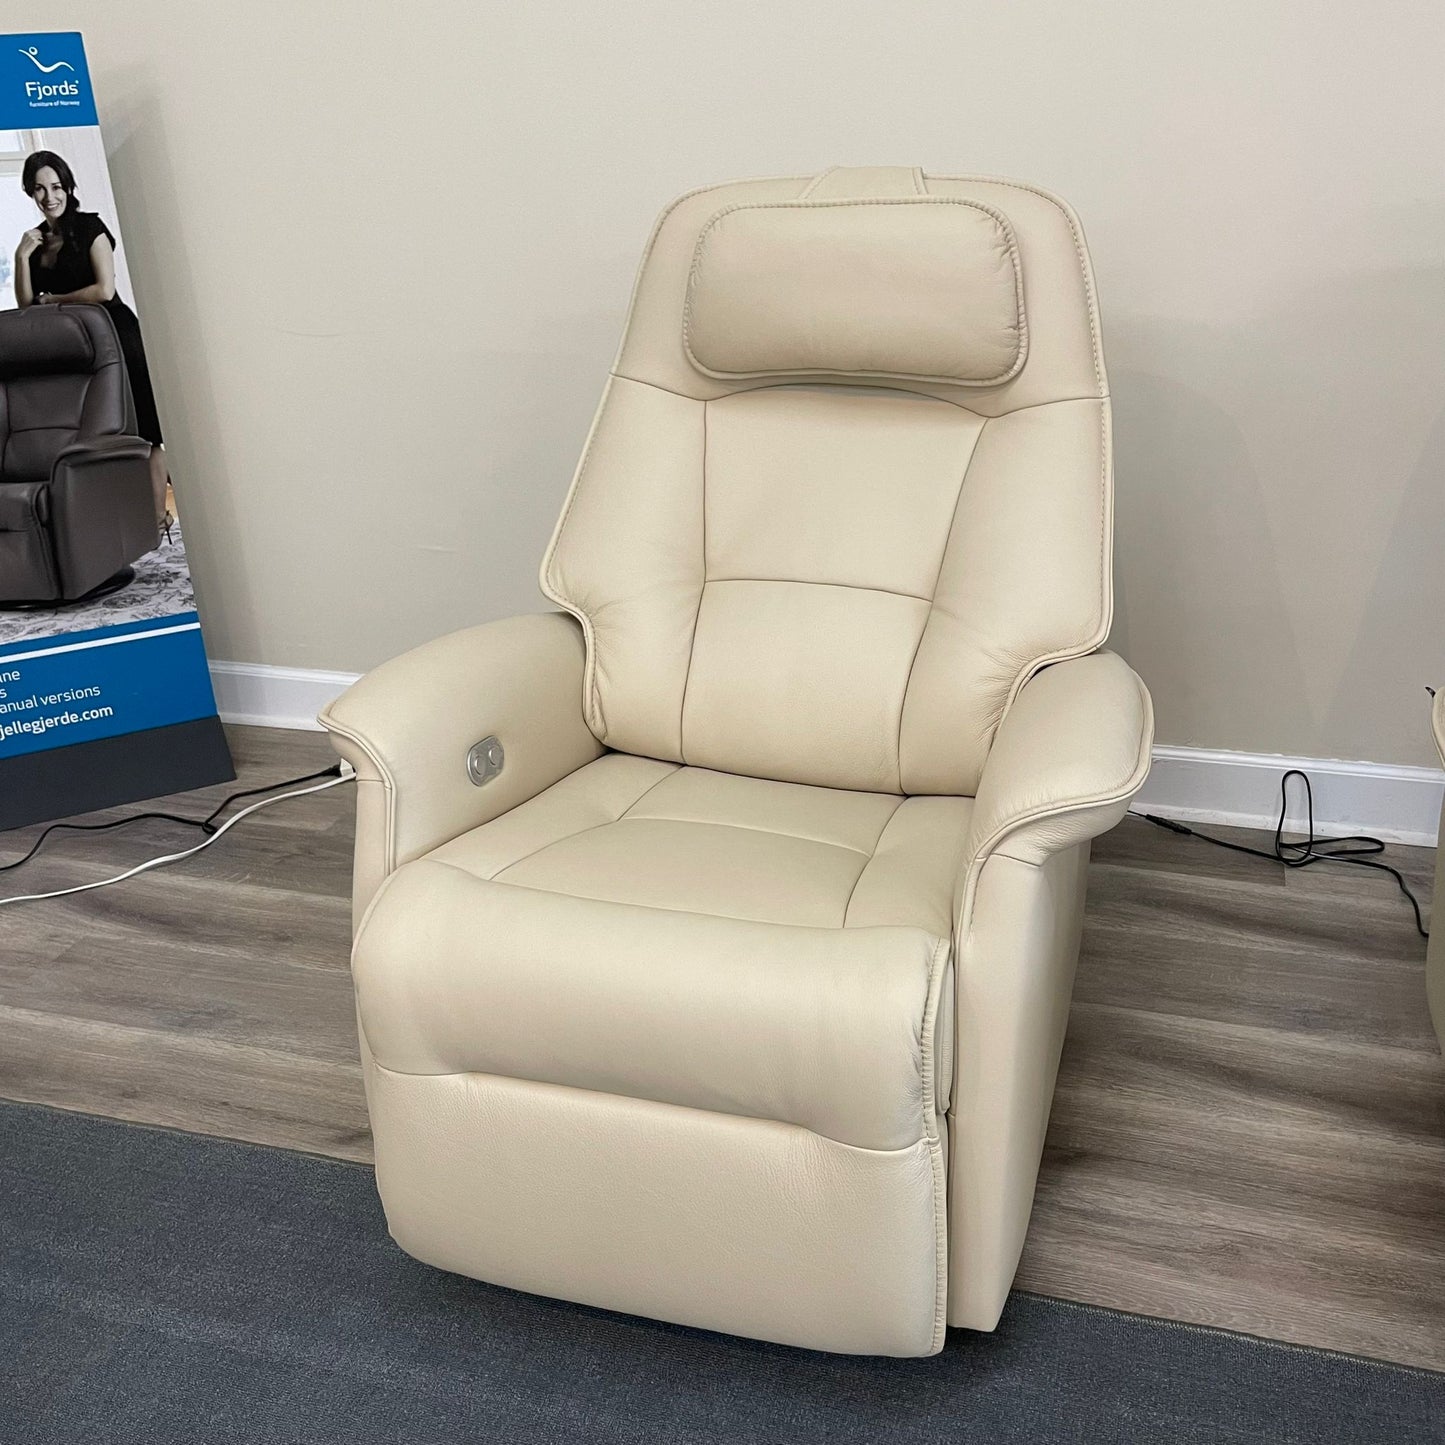 Fjords Stockholm - Small Size - (Swivel / Glider Power Recliner)